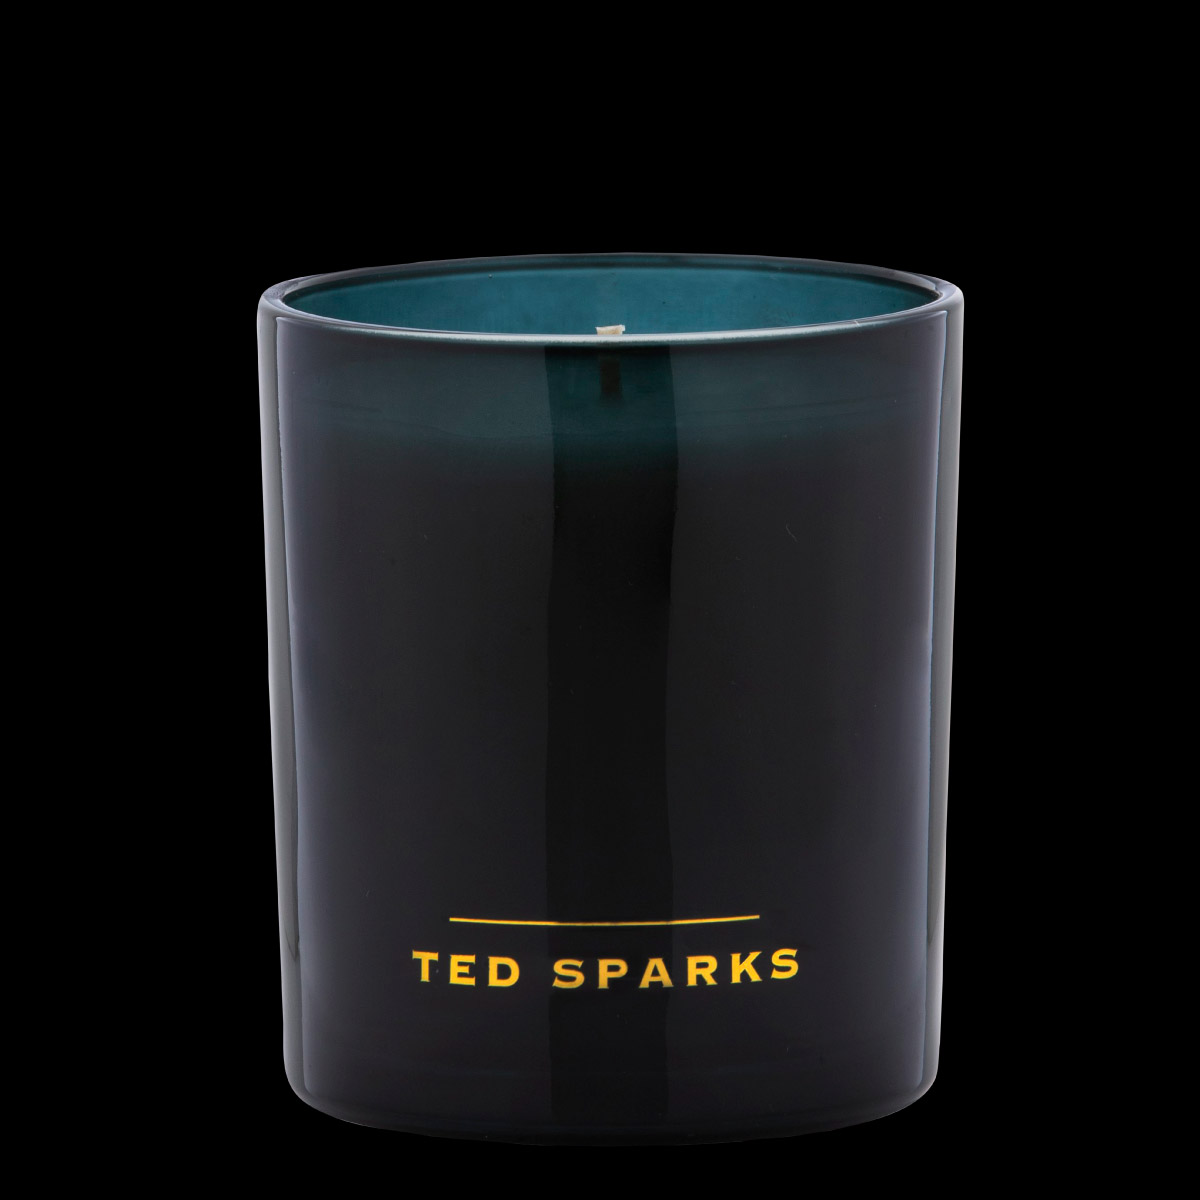 Bamboo & Peony - Demi Duftkerze 290g von Ted Sparks